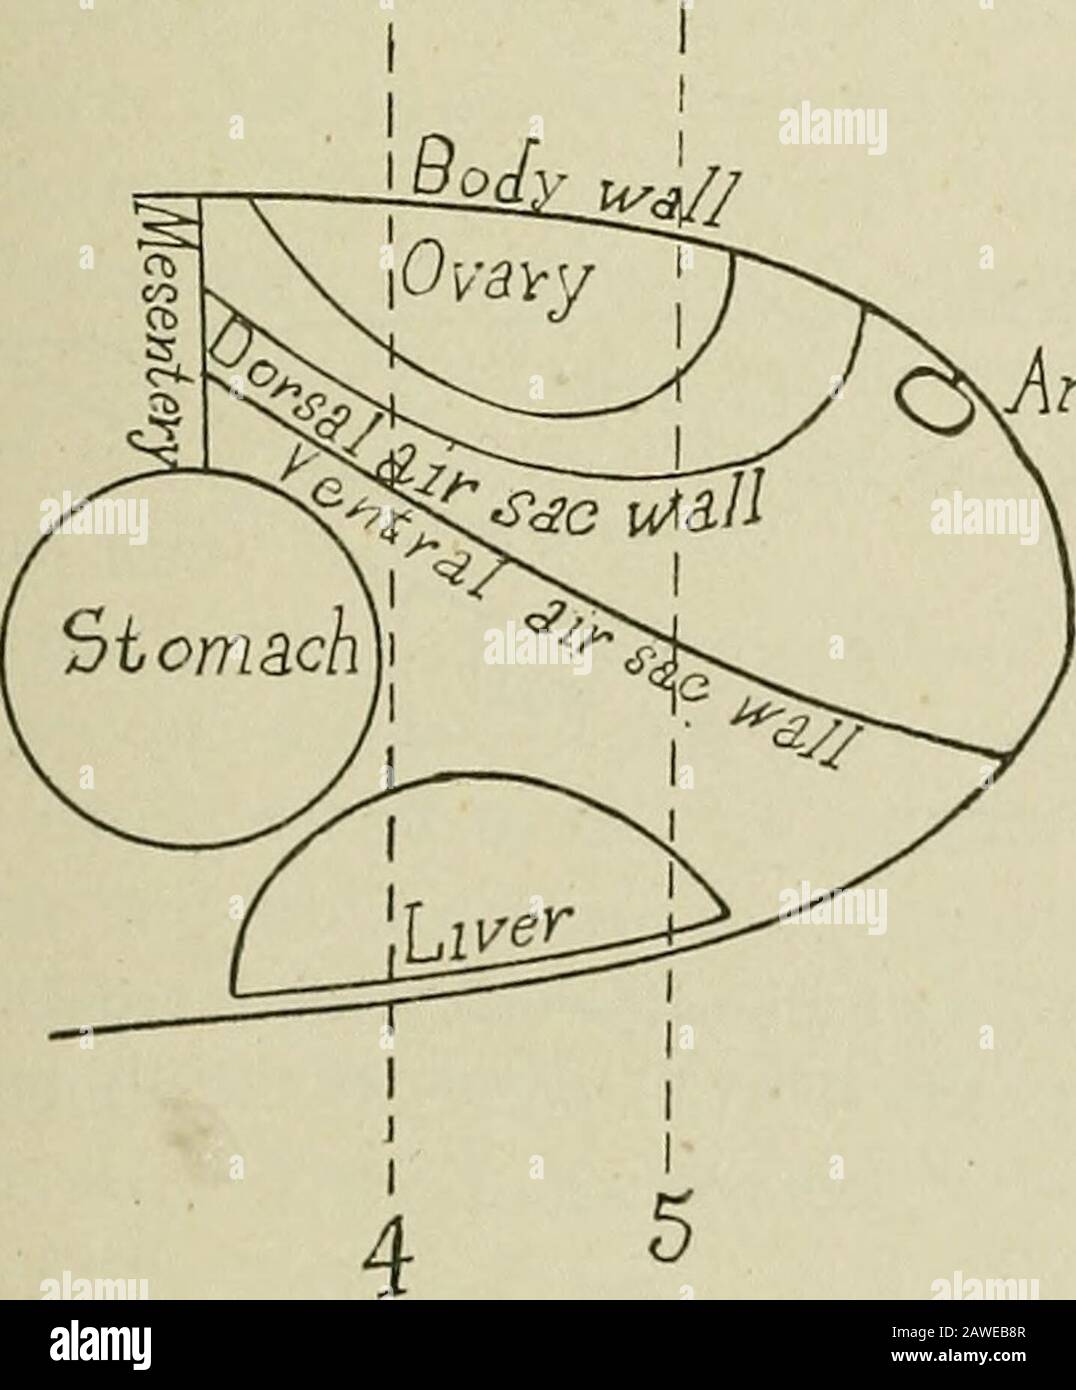 Annual report of the Maine Agricultural Experiment Station . hedby peritoneum. They enter opposite sides of the rectum justbehind the ileocolic valve. Where the coeca parallel the trans-verse part of the small intestine the left one lies craniad andventrad to the intestine. The right coecum lies caudal anddorsal to it. The left coecum thus lies farther forward on theovary than does the intestine. When a laying period is approached the growing yolks onthe ovary crowd the viscera caudad. The intestine and coecumare forced backward and downward from the ovary. Themesentery of the intestine, the i Stock Photo